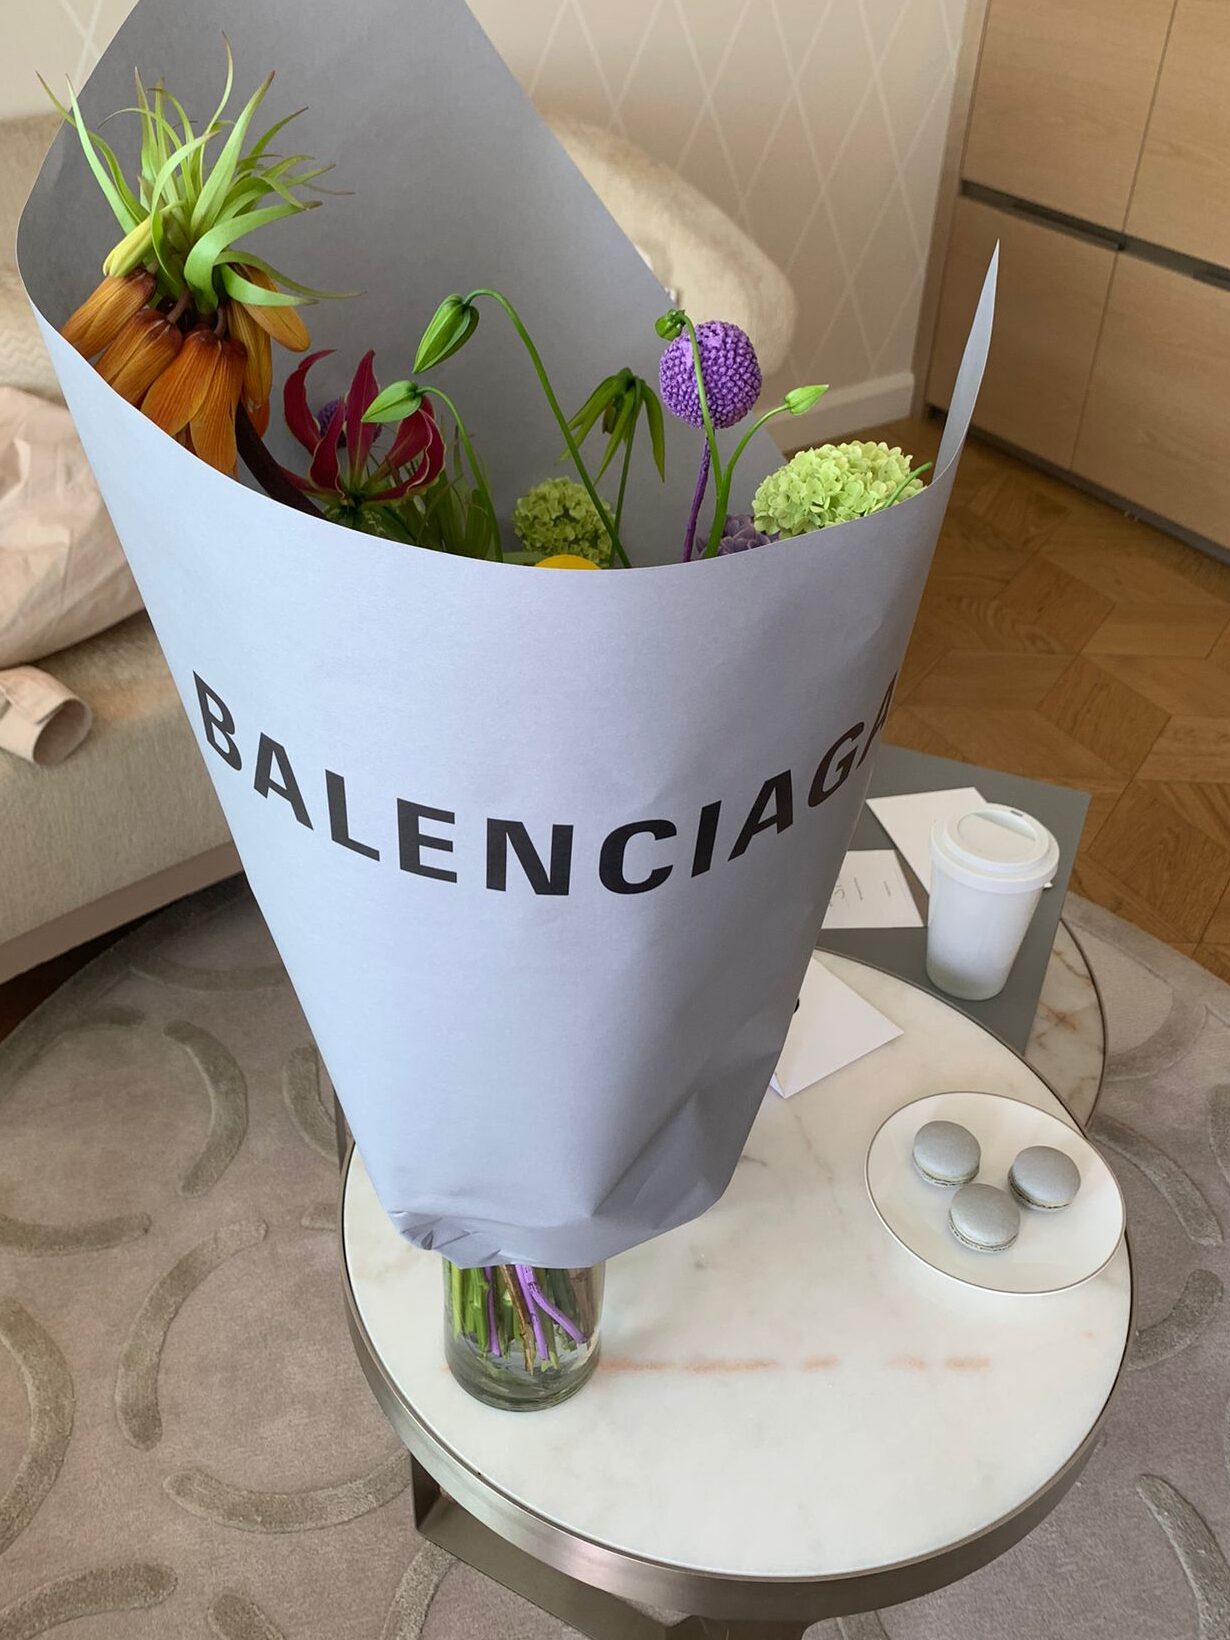 Flowers wrapped in Balenciaga paper